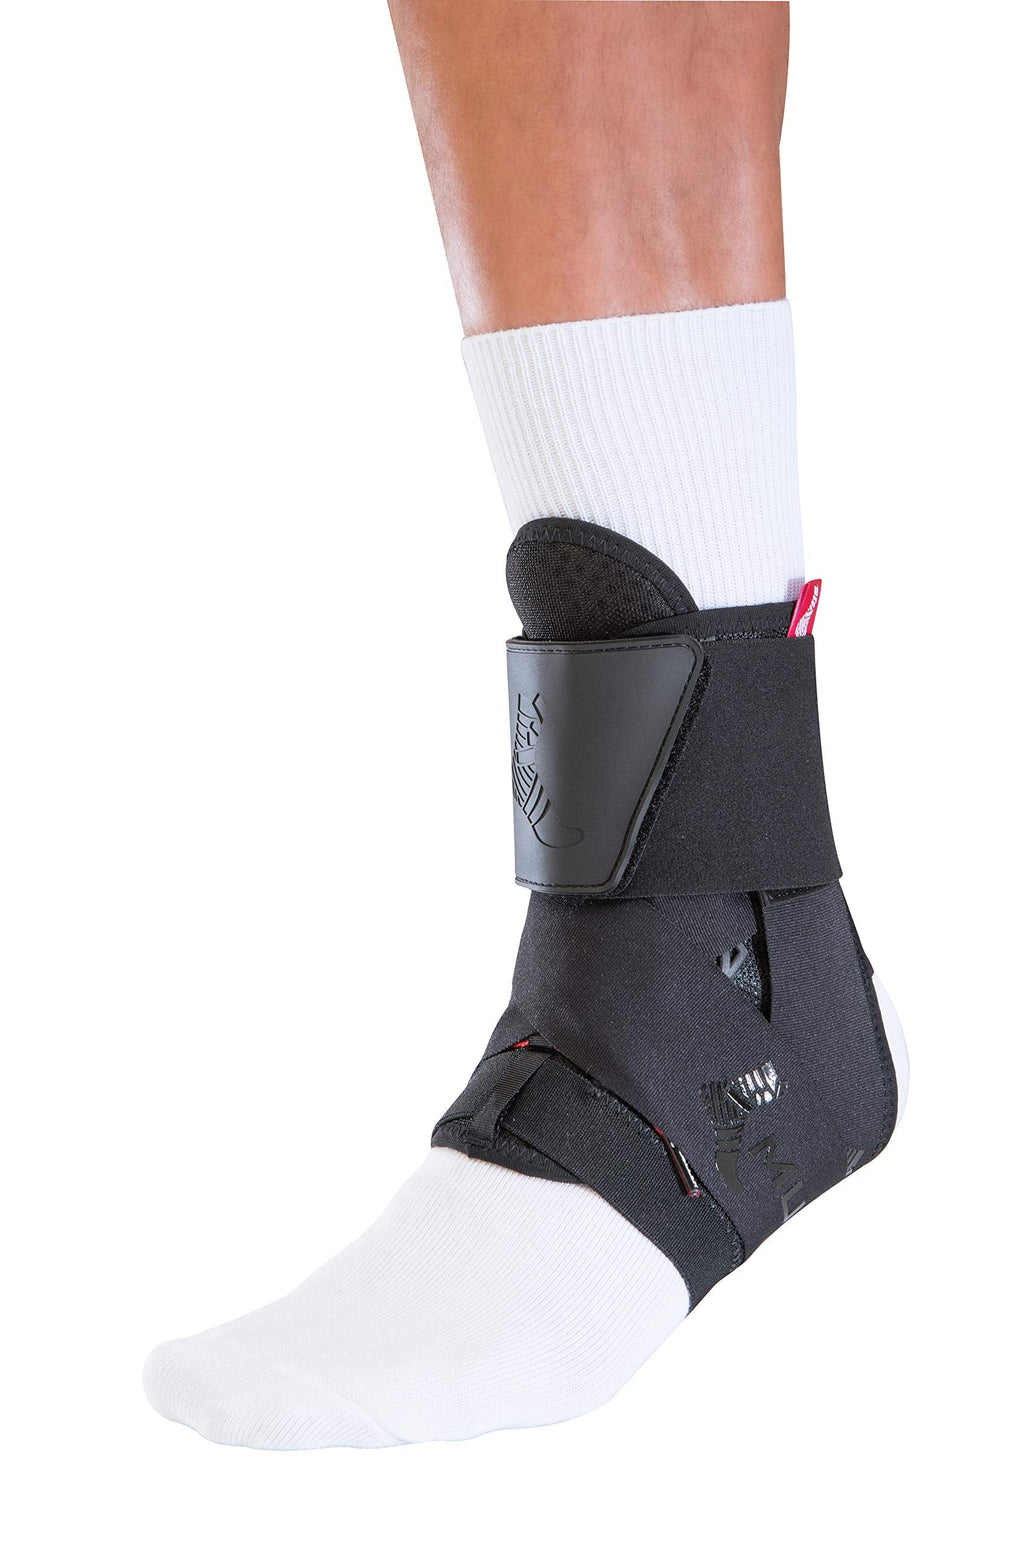 [Australia] - Mueller Sports Medicine The One Ankle Support Brace, For Men and Women, Black, Large 